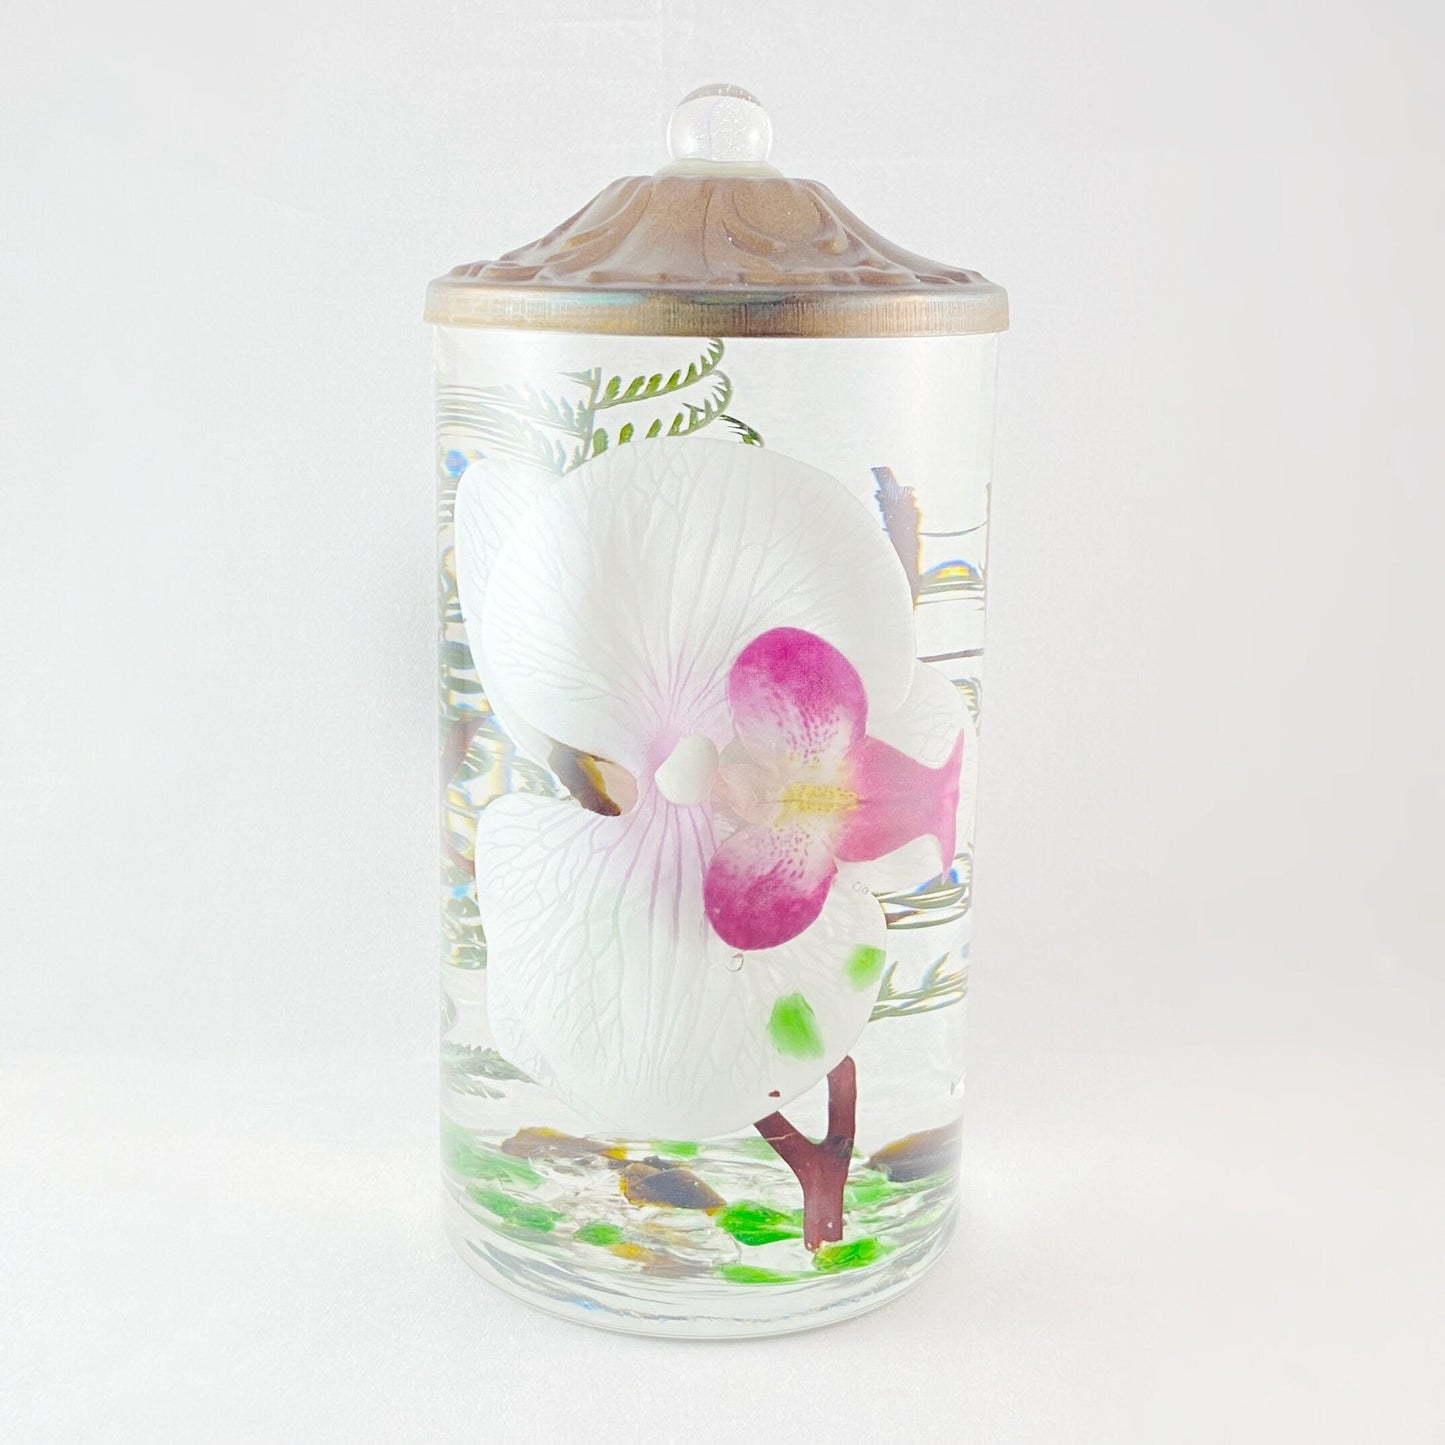 Liquid Candle with White/Pink Orchid, Liquid Candle/Home Decor - Handmade in USA - Long Burn Time